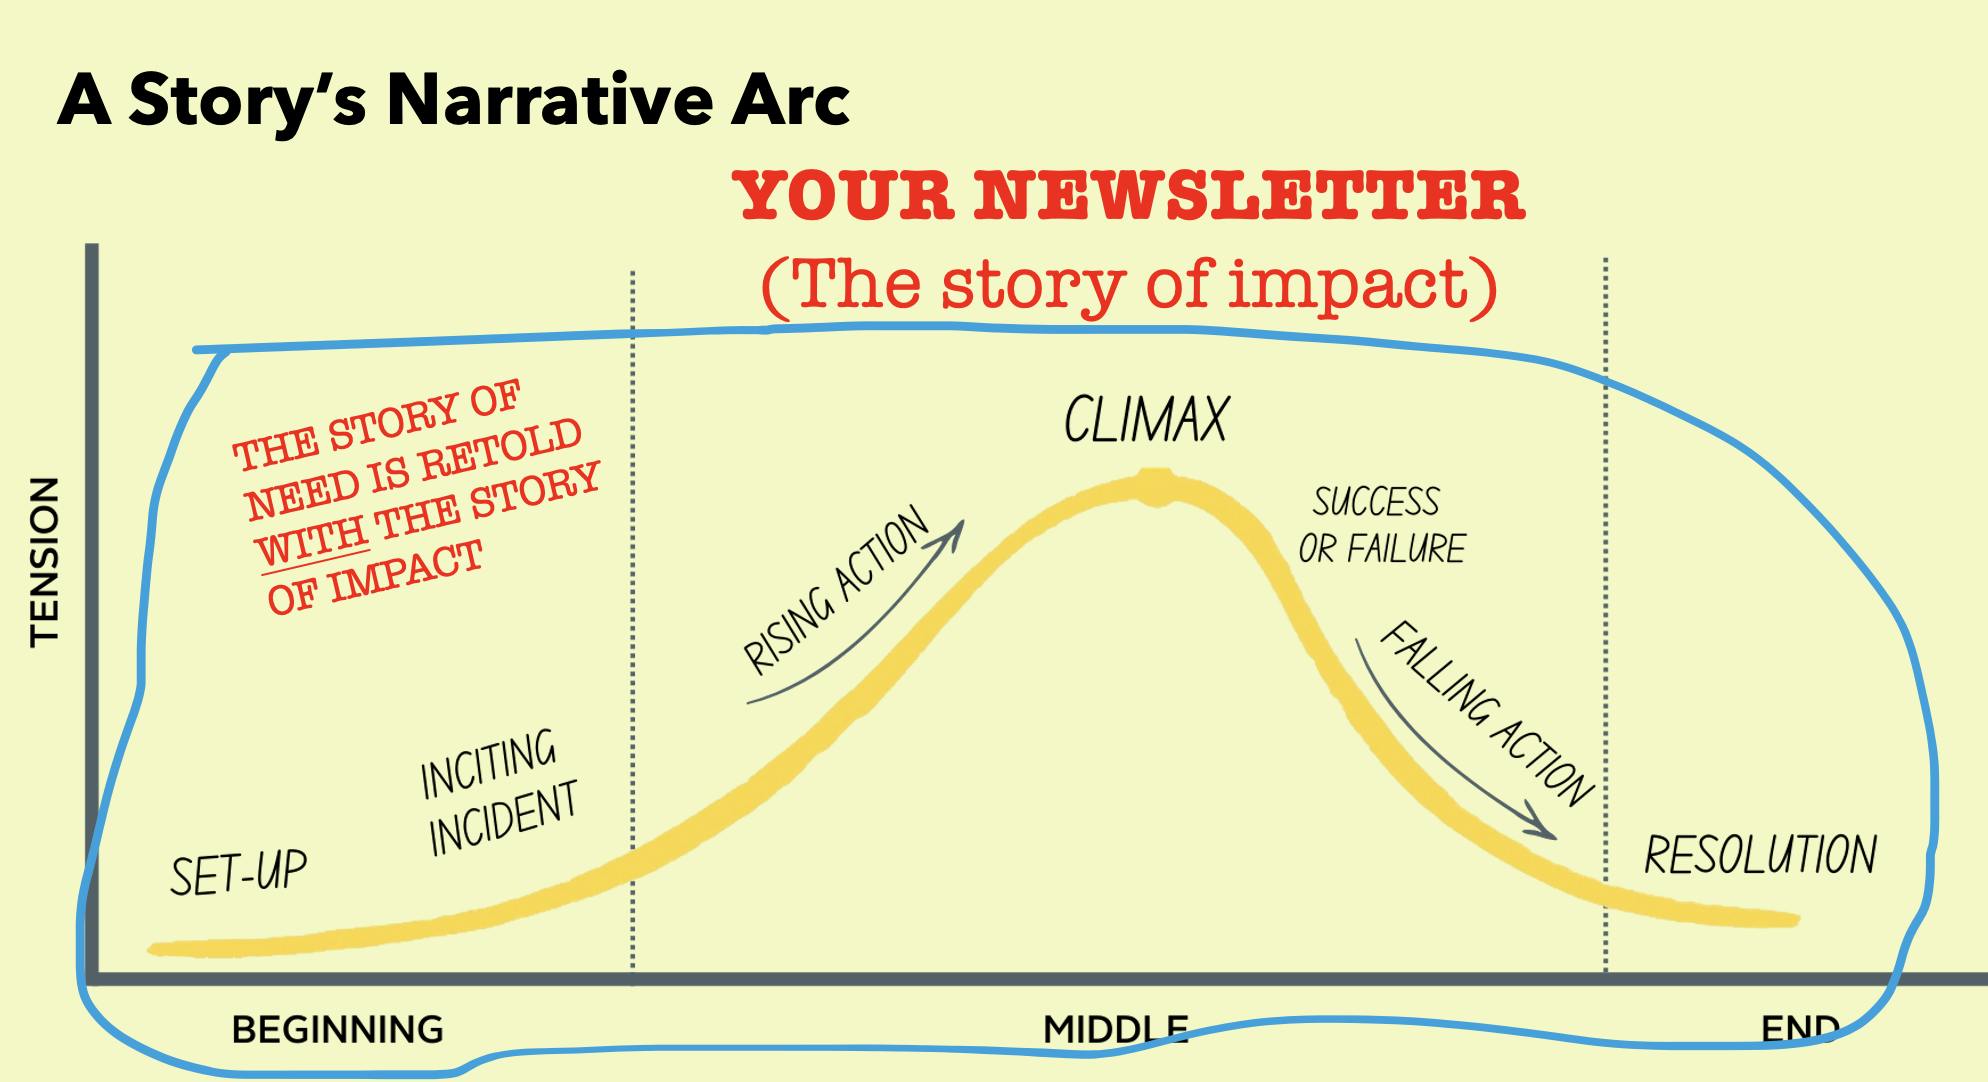 A story's narrative arc: Your newsletter (the story of impact): This is the same graph as above but with the arc circled in blue to illustrate that the entire story should be told in a newsletter story.